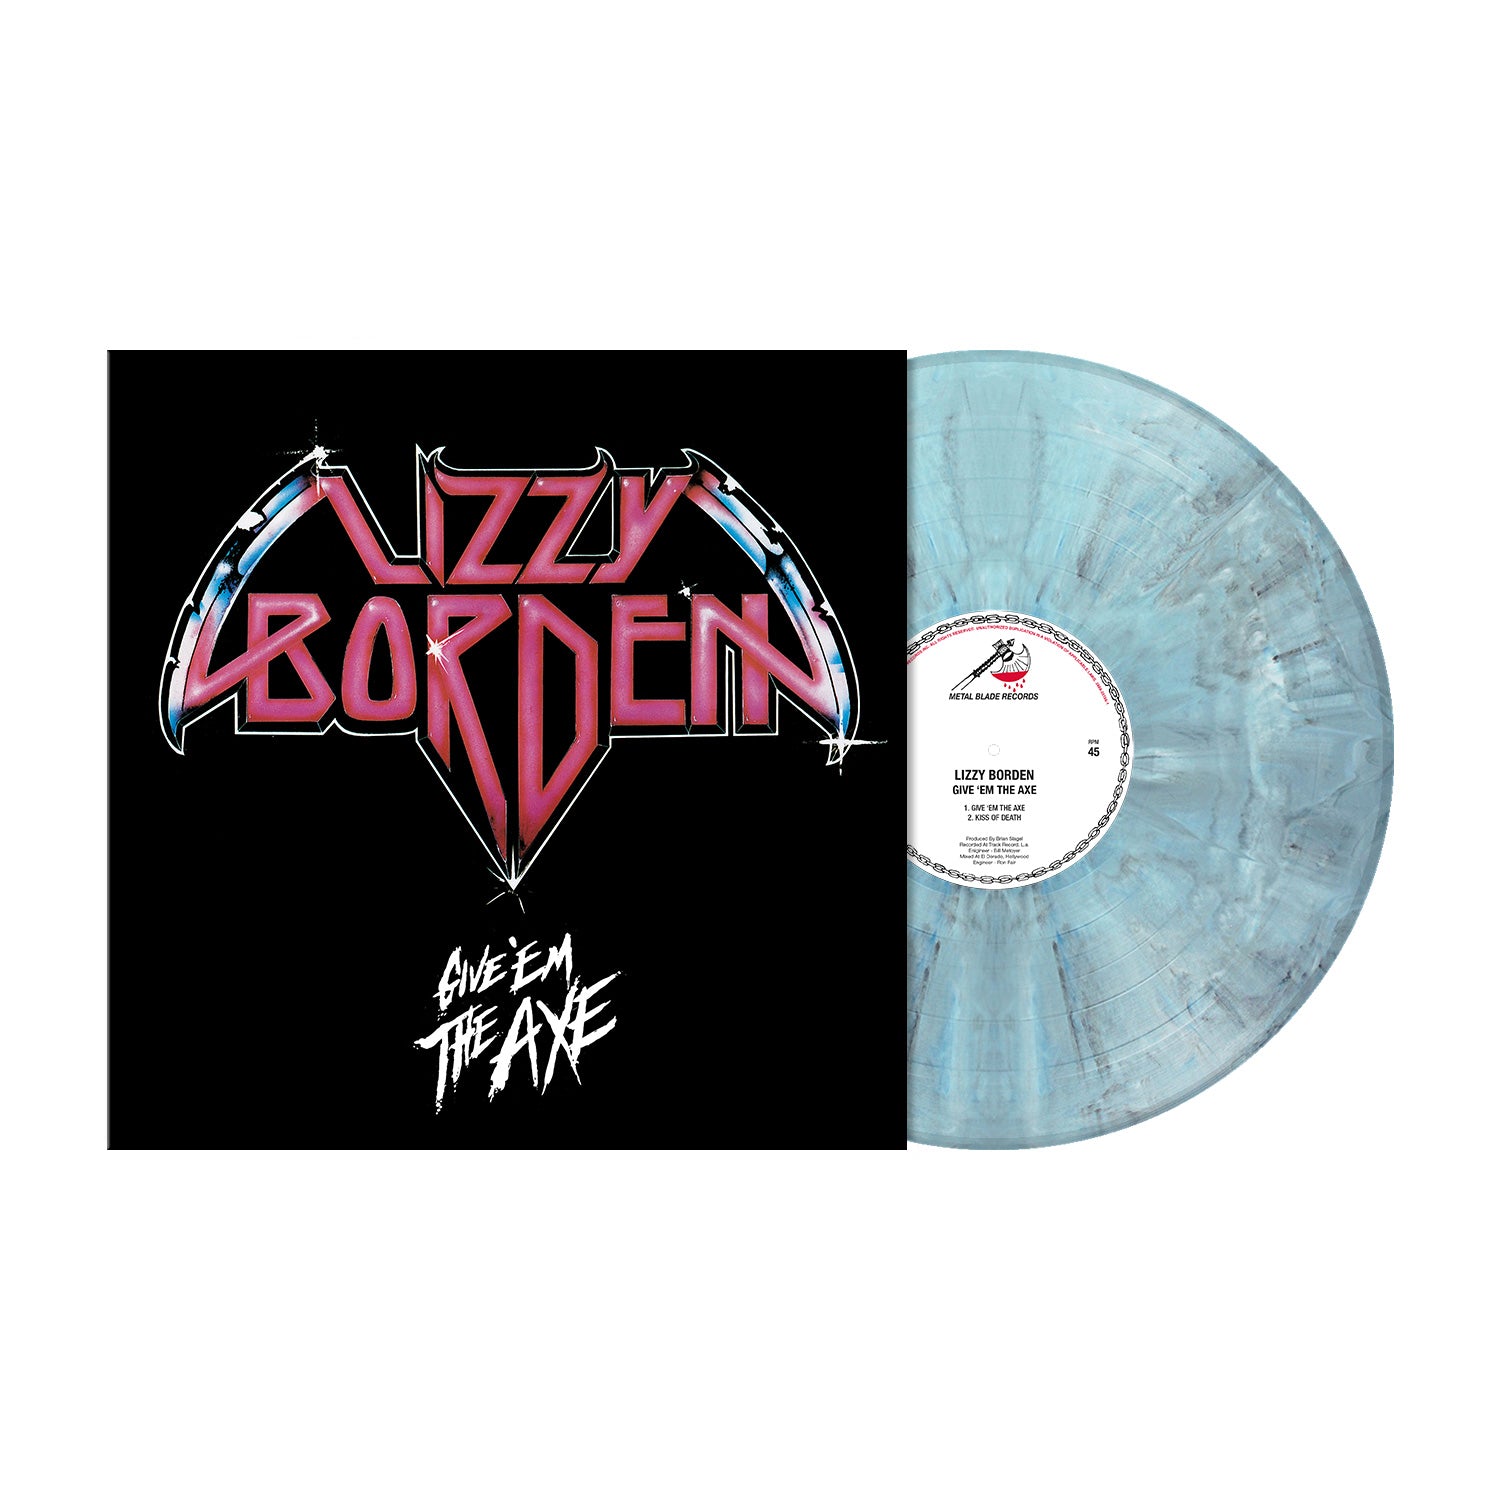 Lizzy Borden "Give Em The Axe" Ice Blue / Black Marbled Vinyl